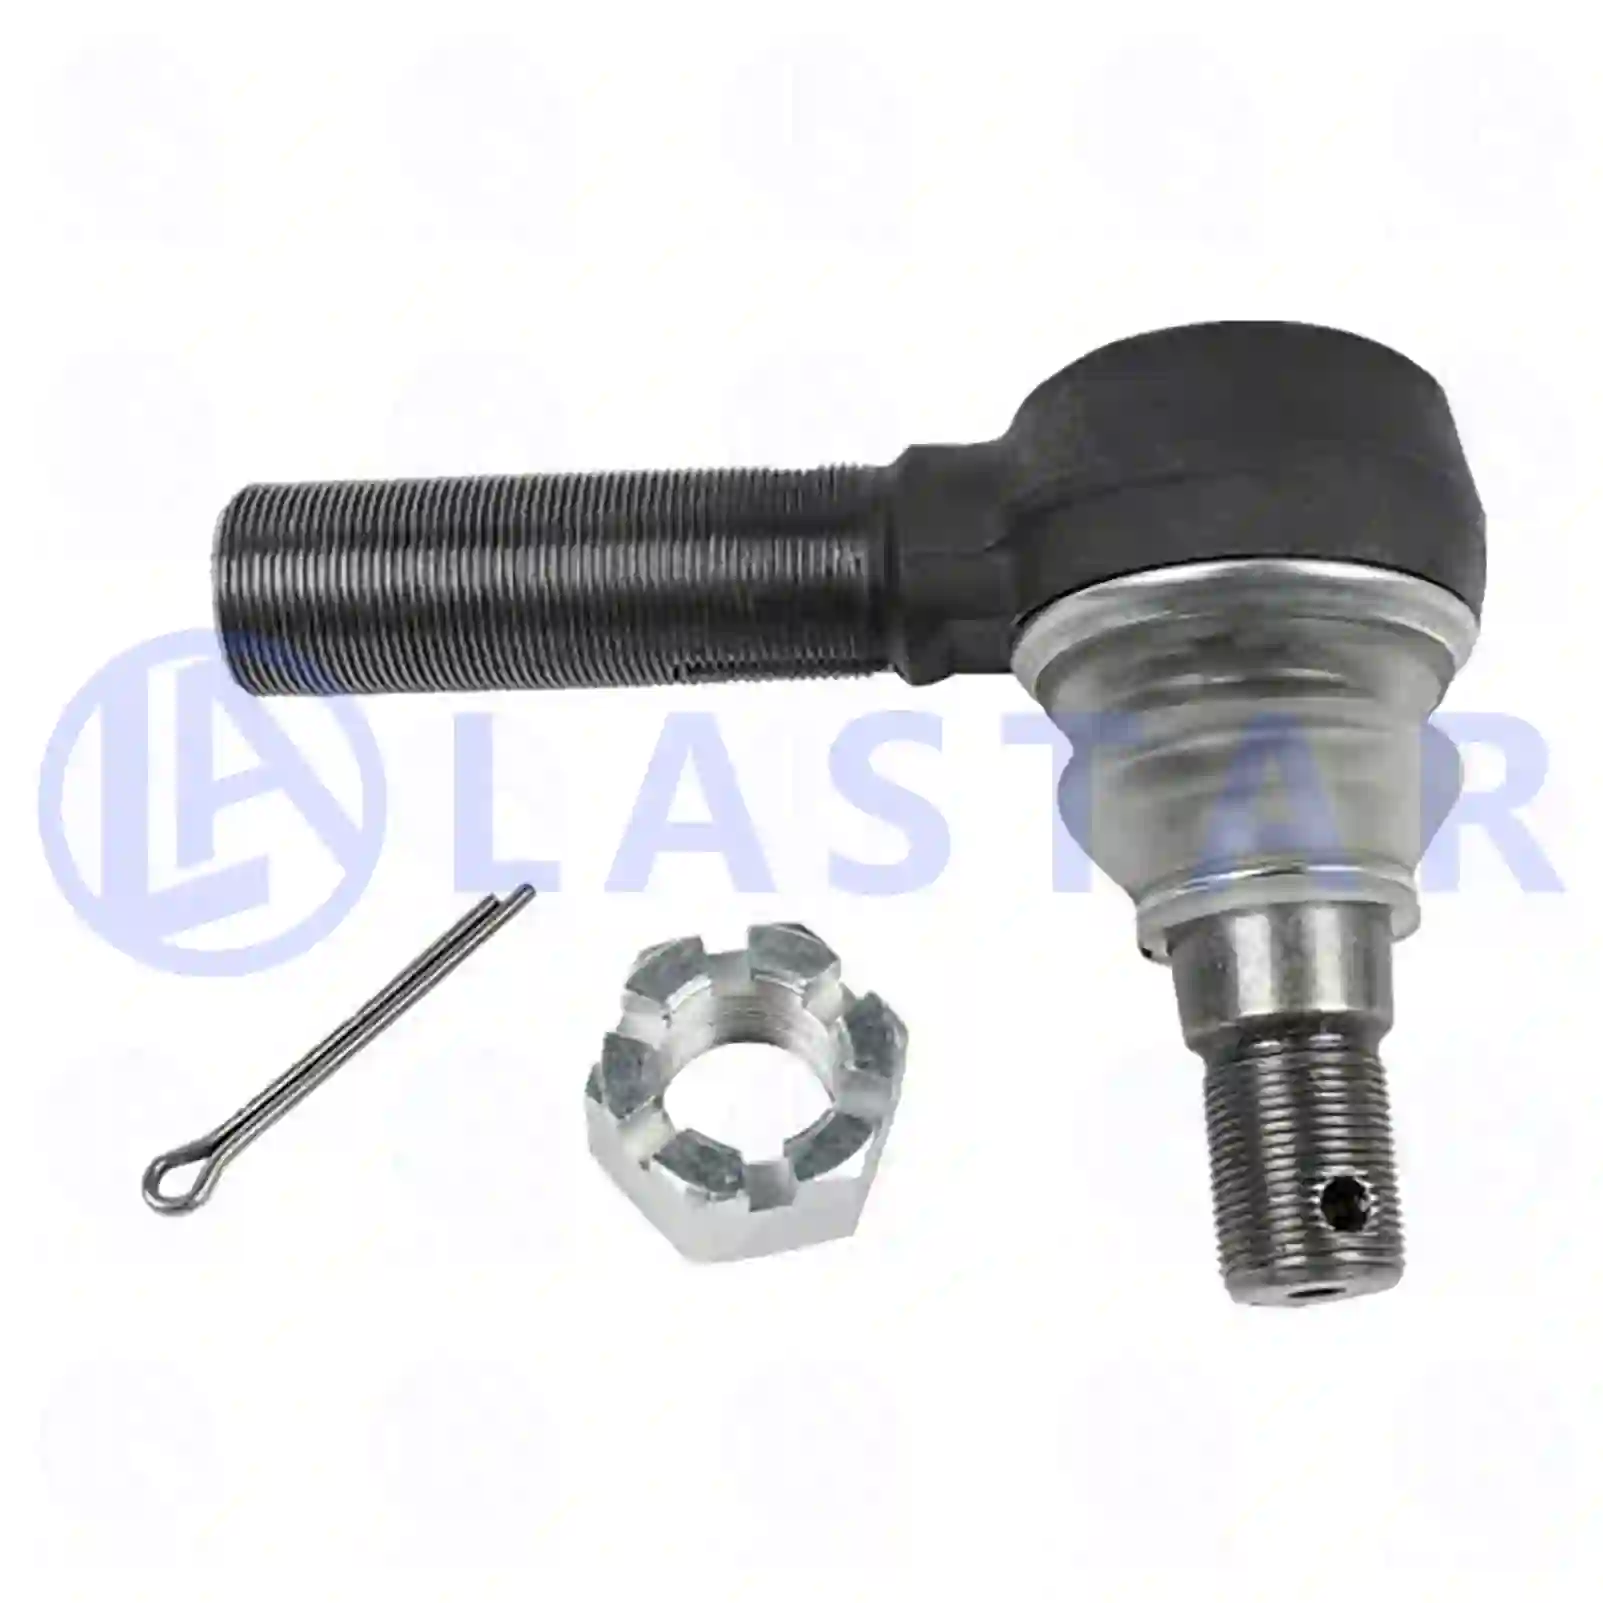 Ball joint, left hand thread, 77704966, 20710008, 21454111, 21554111, ZG40350-0008 ||  77704966 Lastar Spare Part | Truck Spare Parts, Auotomotive Spare Parts Ball joint, left hand thread, 77704966, 20710008, 21454111, 21554111, ZG40350-0008 ||  77704966 Lastar Spare Part | Truck Spare Parts, Auotomotive Spare Parts